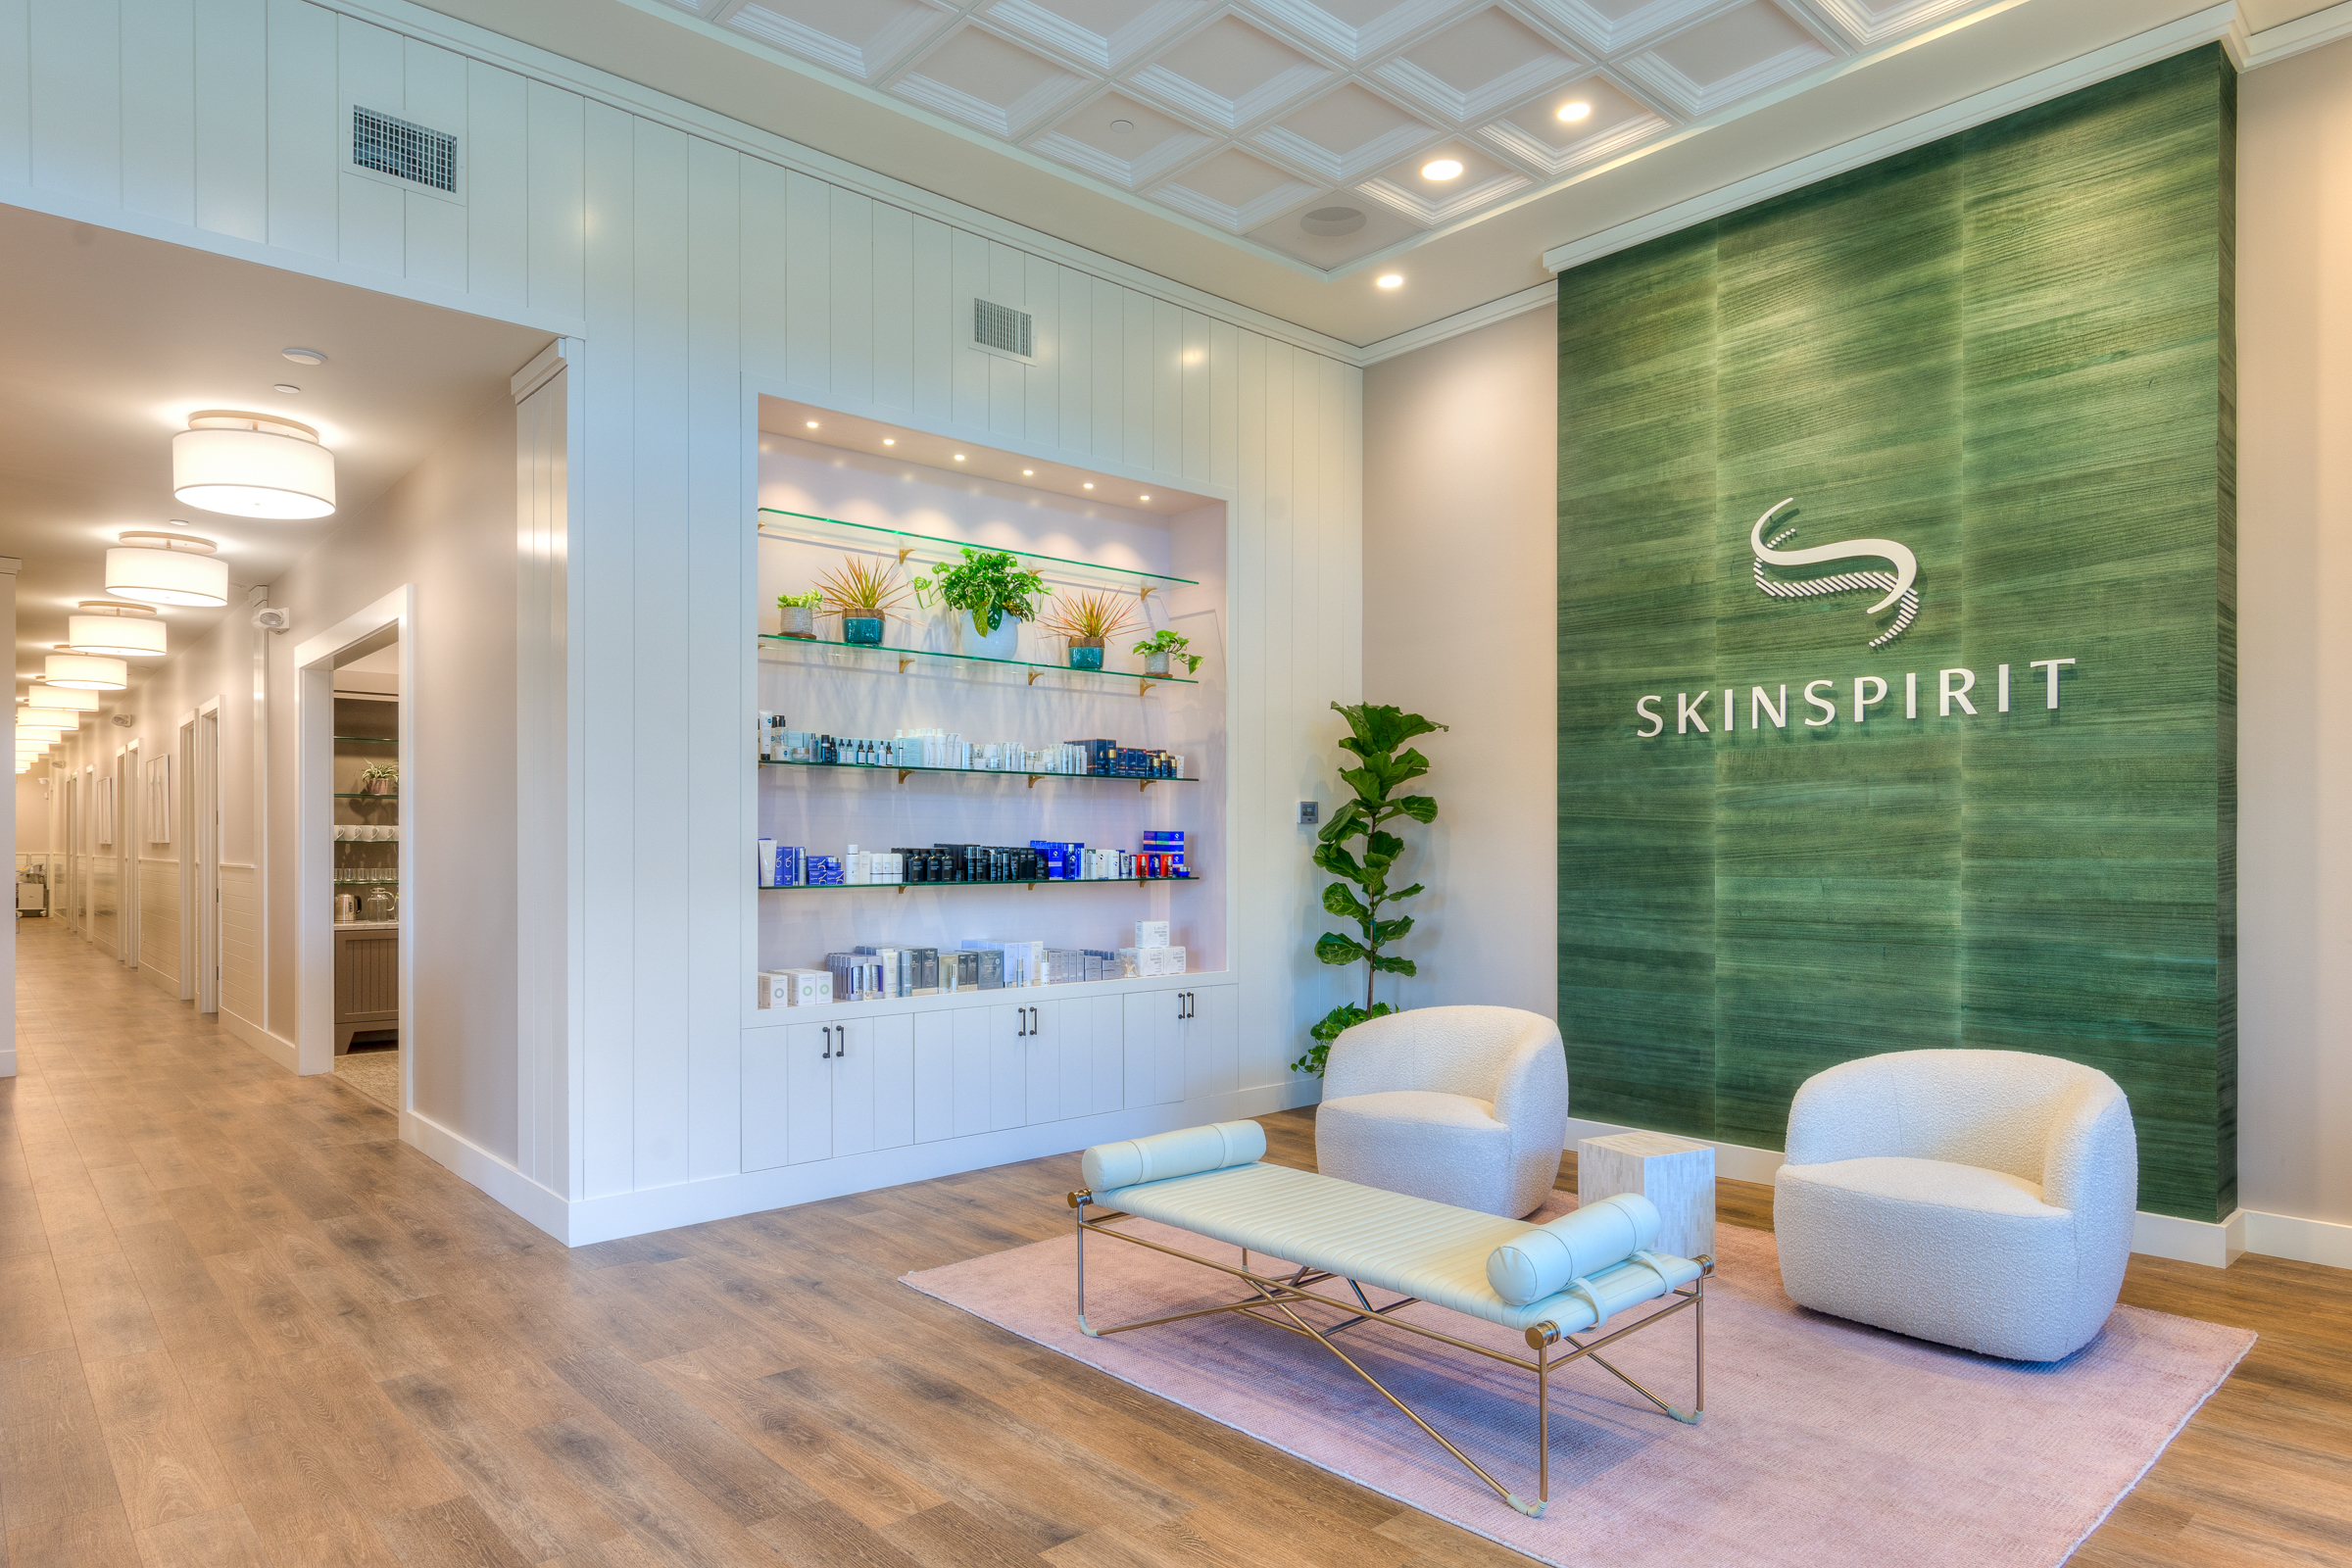 Entrance to Skin Spirit featuring a sitting area and a selection of skincare products